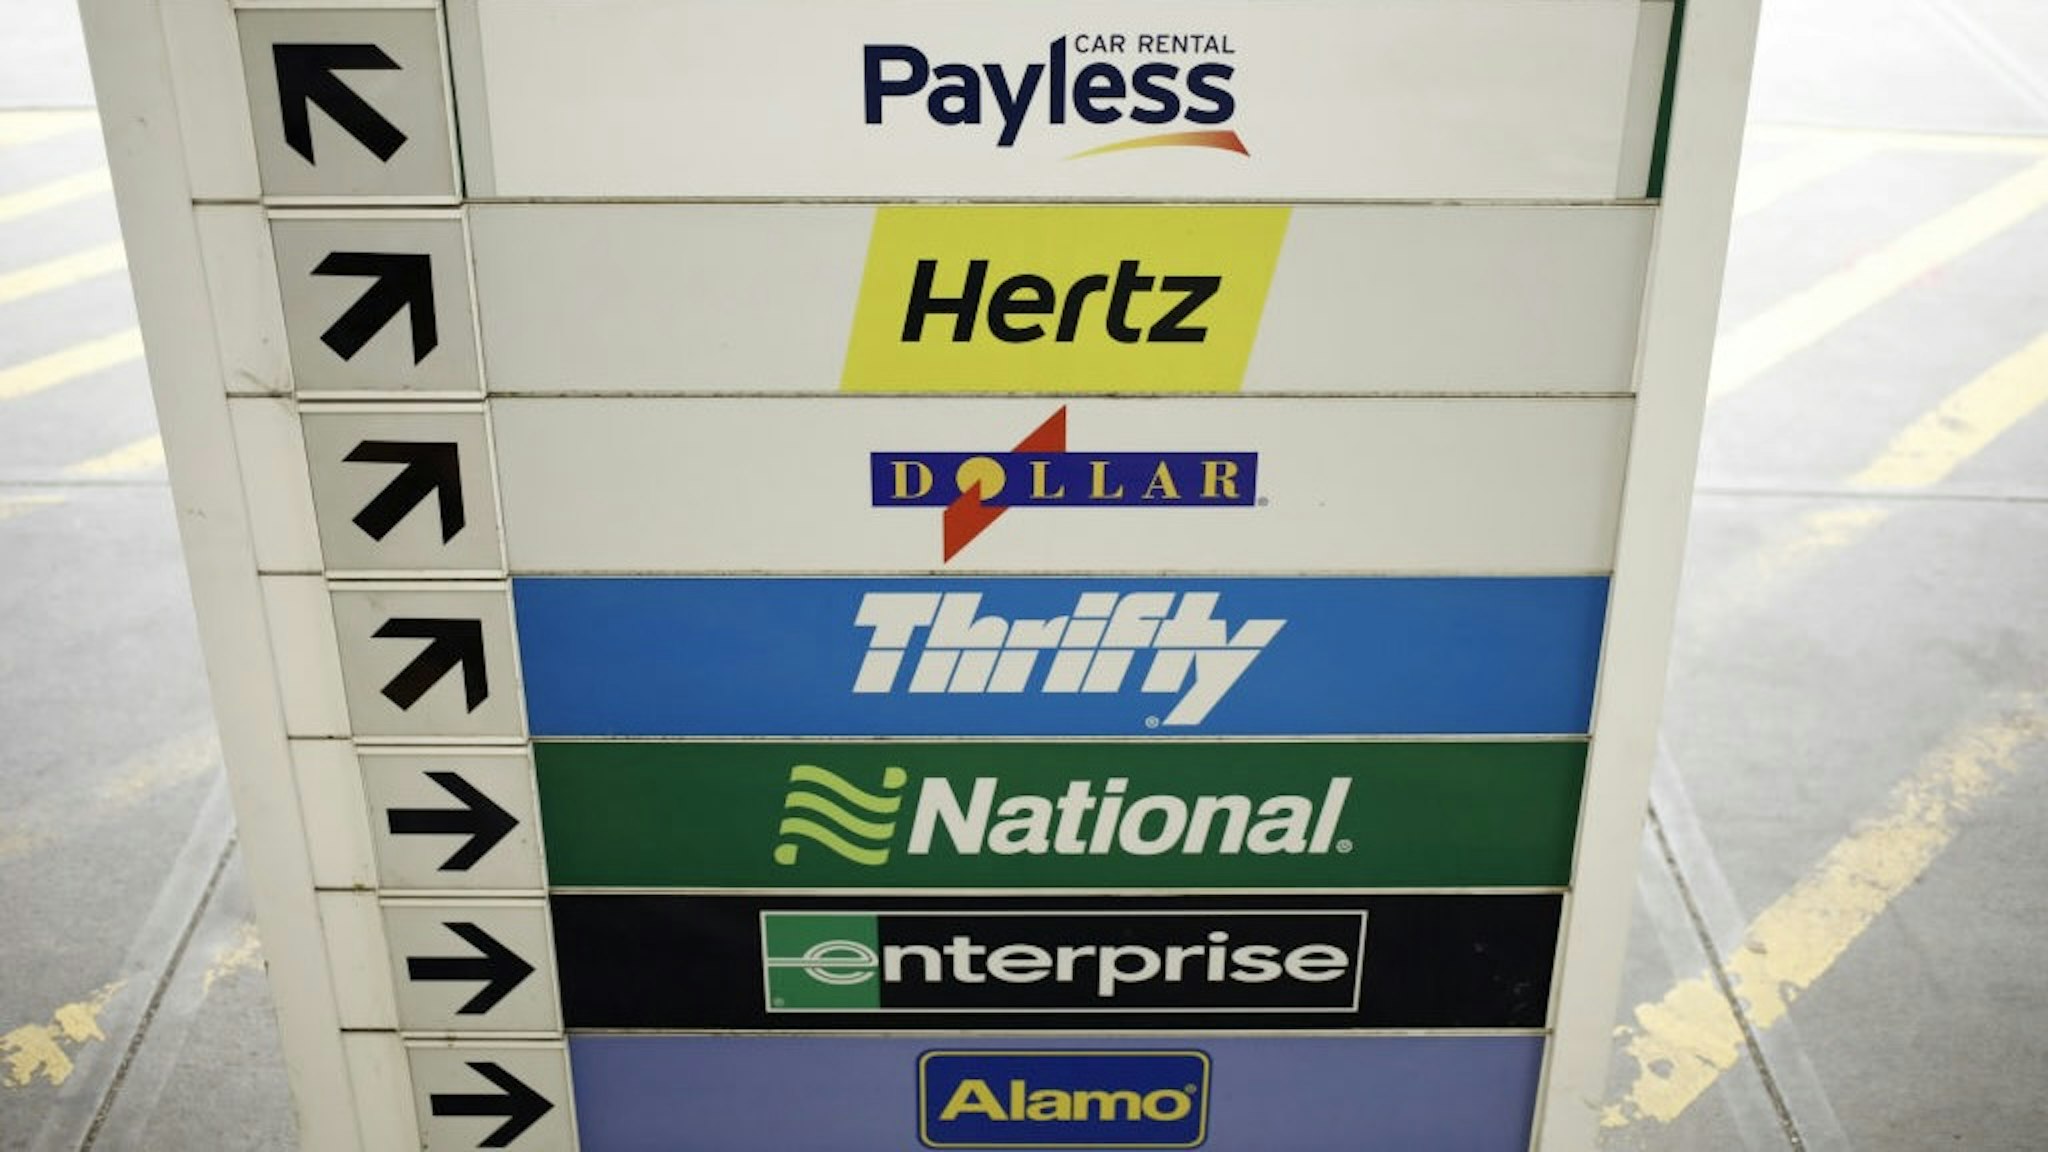 A Hertz Location As 2021 U.S. Car Rental Revenue Climbs 21% Budget, Payless, Hertz, Dollar, Thrifty, National, Enterprise and Alamo rental car signage at the Louisville International Airport in Louisville, Kentucky, U.S., on Thursday, Jan. 20, 2022. The U.S. car rental industry achieved overall revenues of $28.1 billion in 2021 - a 21% gain over the pandemic year of 2020, according to data collected by Auto Rental News. Photographer: Luke Sharrett/Bloomberg via Getty Images Bloomberg / Contributor